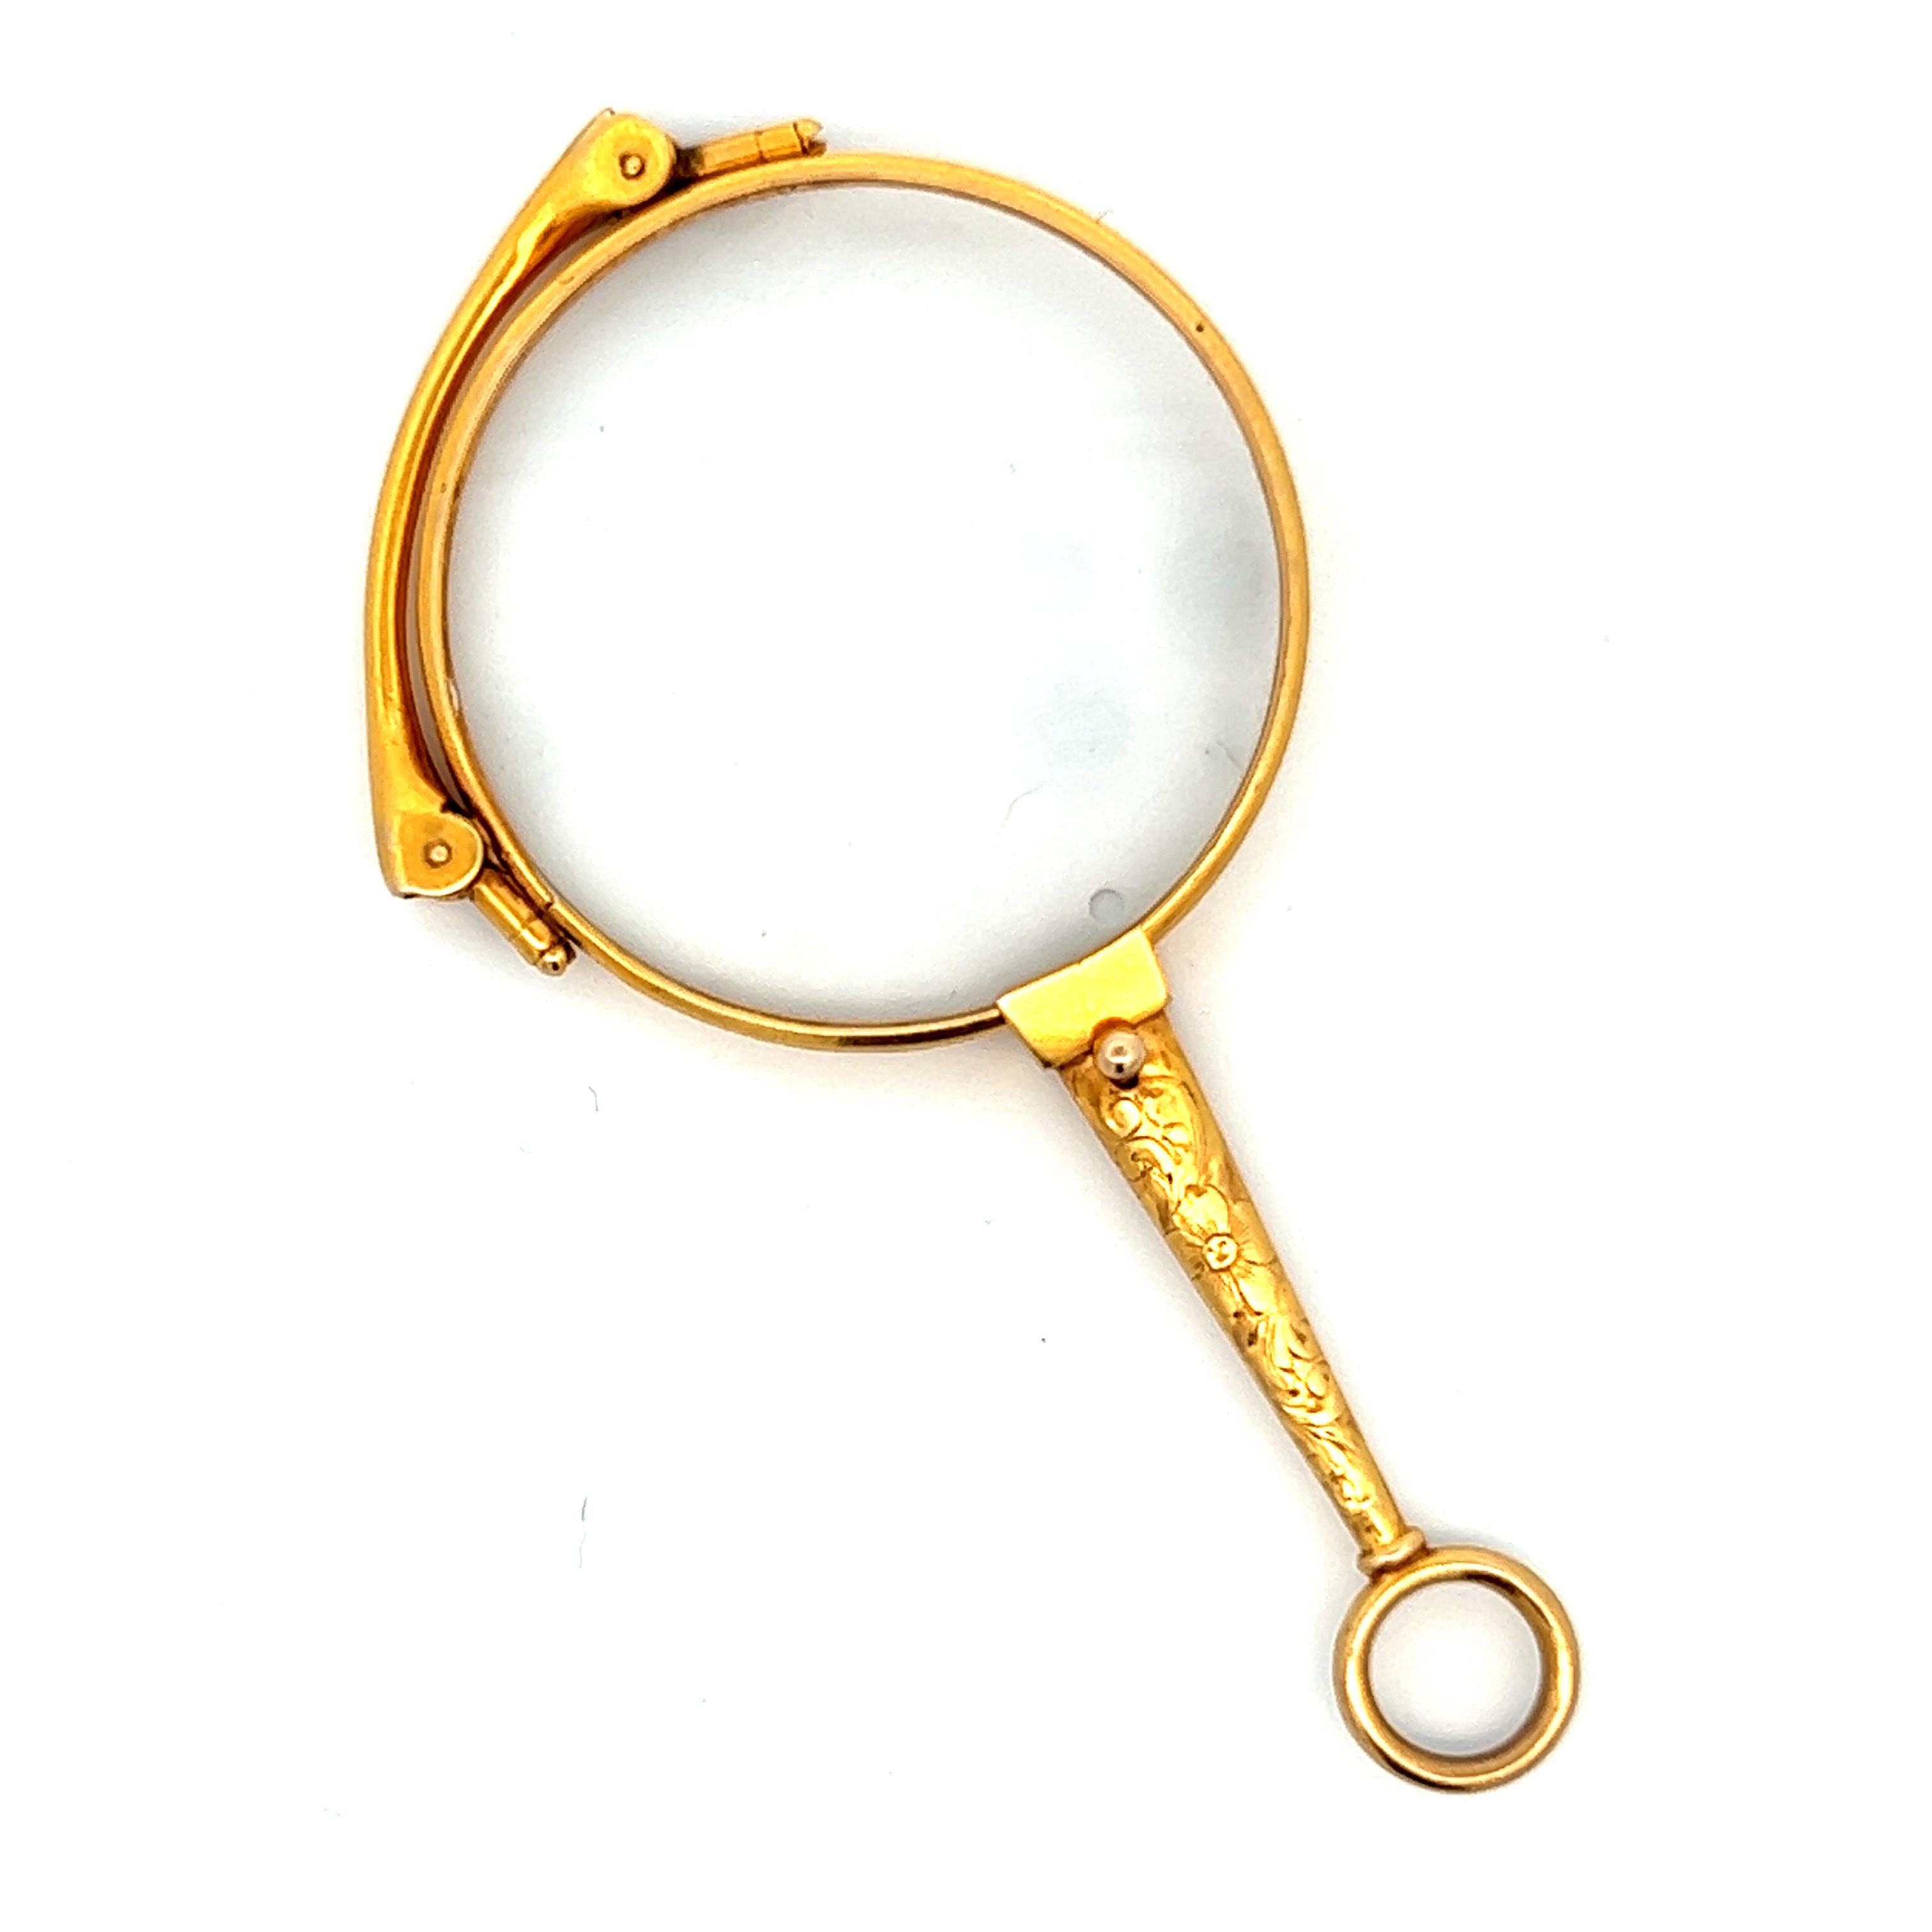 This amazing collectors item is an Edwardian 14k yellow gold engraved Lorgnette from 1910. What makes this item so special is its incredible condition for its age, as well as its unique function and fashion. Not only can this lorgnette make a